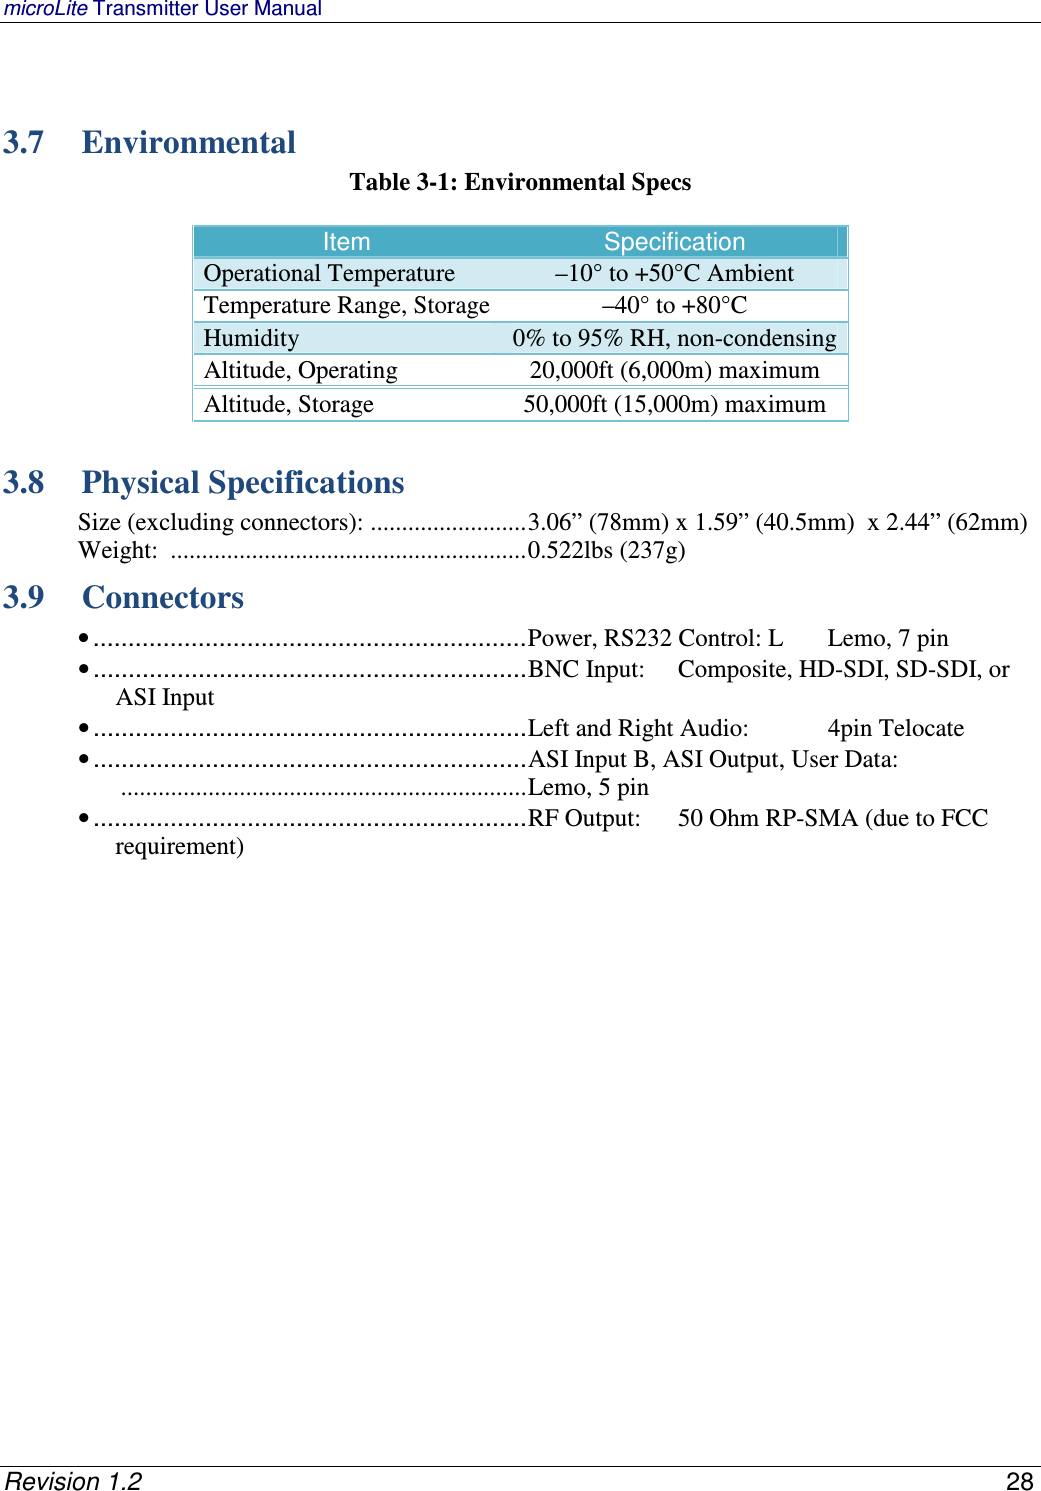 microLite Transmitter User Manual   Revision 1.2    28   3.7 Environmental Table 3-1: Environmental Specs  Item Specification Operational Temperature  –10° to +50°C Ambient Temperature Range, Storage –40° to +80°C Humidity 0% to 95% RH, non-condensing Altitude, Operating 20,000ft (6,000m) maximum Altitude, Storage 50,000ft (15,000m) maximum  3.8 Physical Specifications Size (excluding connectors):  ......................... 3.06” (78mm) x 1.59” (40.5mm)  x 2.44” (62mm) Weight:  ......................................................... 0.522lbs (237g) 3.9 Connectors • .............................................................. Power, RS232 Control: L  Lemo, 7 pin  • .............................................................. BNC Input:   Composite, HD-SDI, SD-SDI, or ASI Input • .............................................................. Left and Right Audio:   4pin Telocate  • .............................................................. ASI Input B, ASI Output, User Data:  ................................................................. Lemo, 5 pin • .............................................................. RF Output:   50 Ohm RP-SMA (due to FCC requirement)   